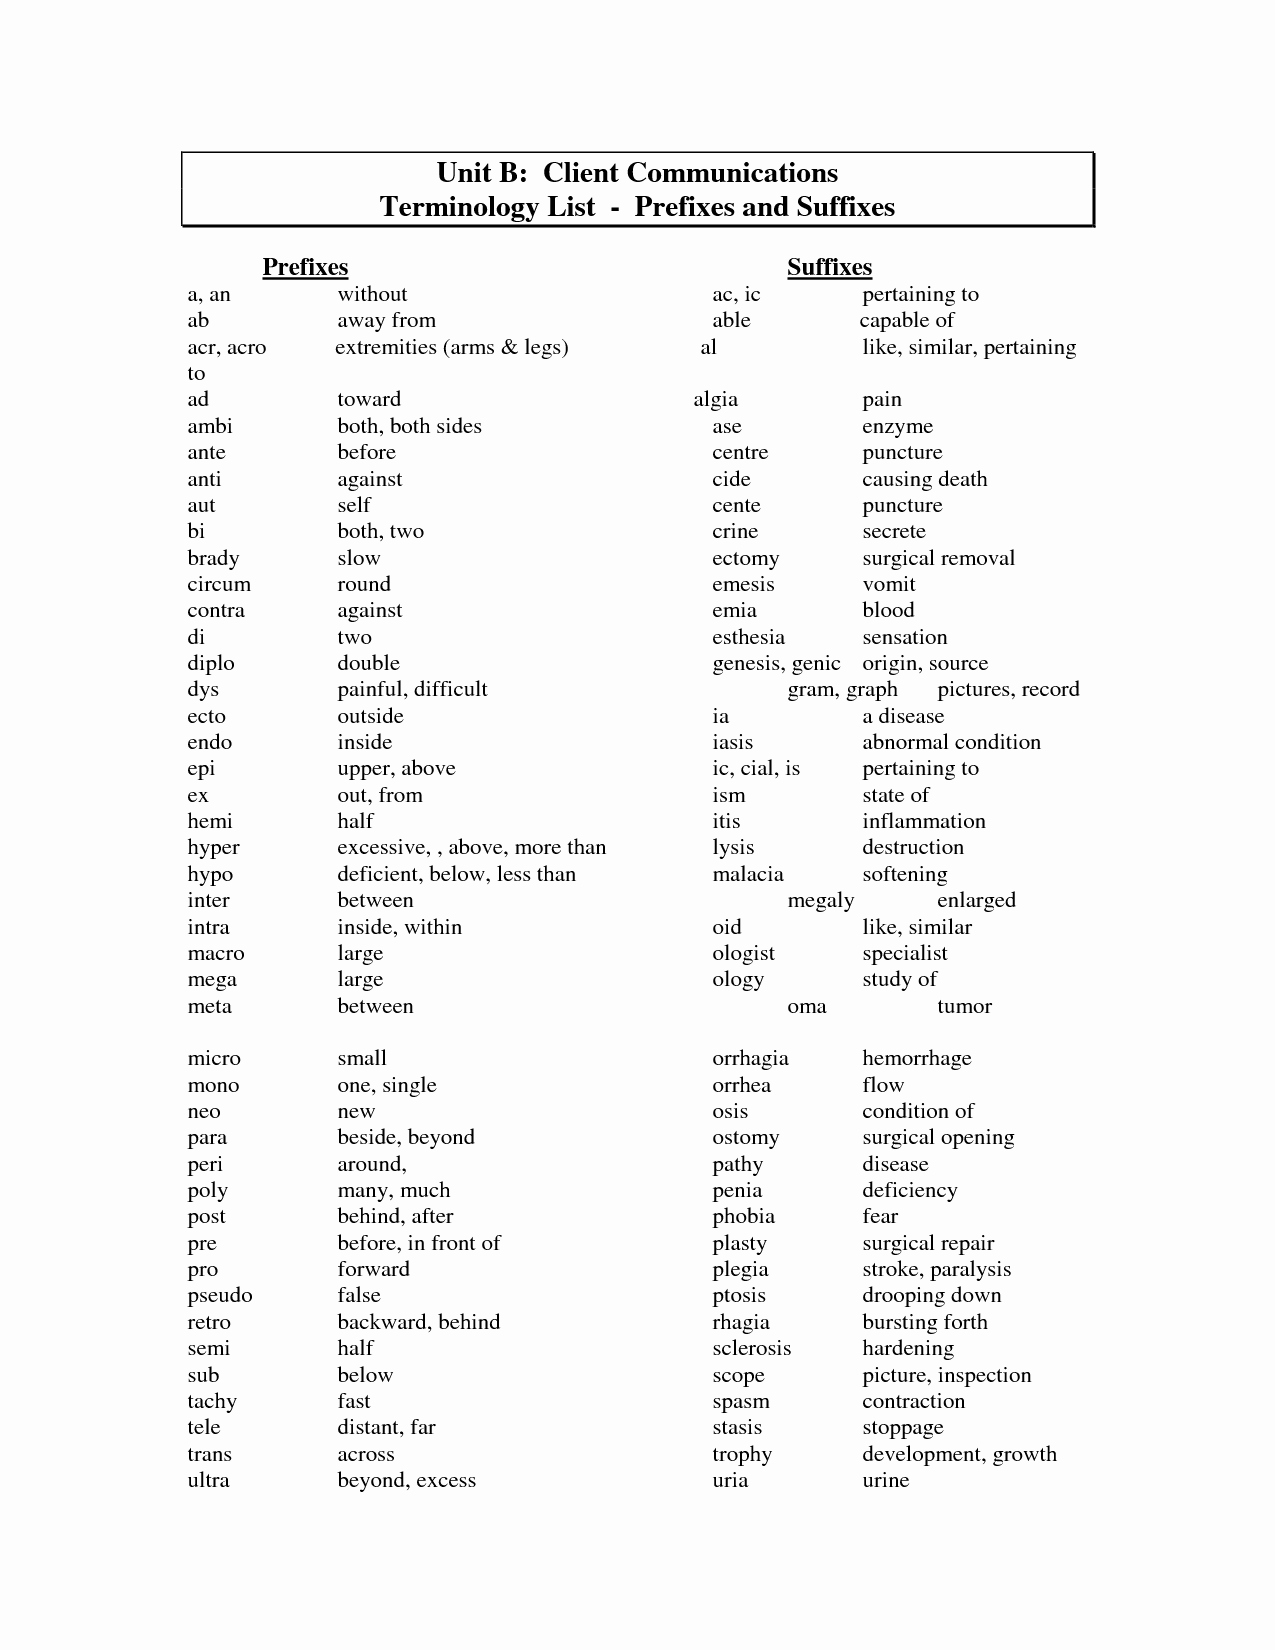 Medical Terminology Suffixes Worksheet Lovely Medical Terminology Suffixes Worksheet Prefixes and Root